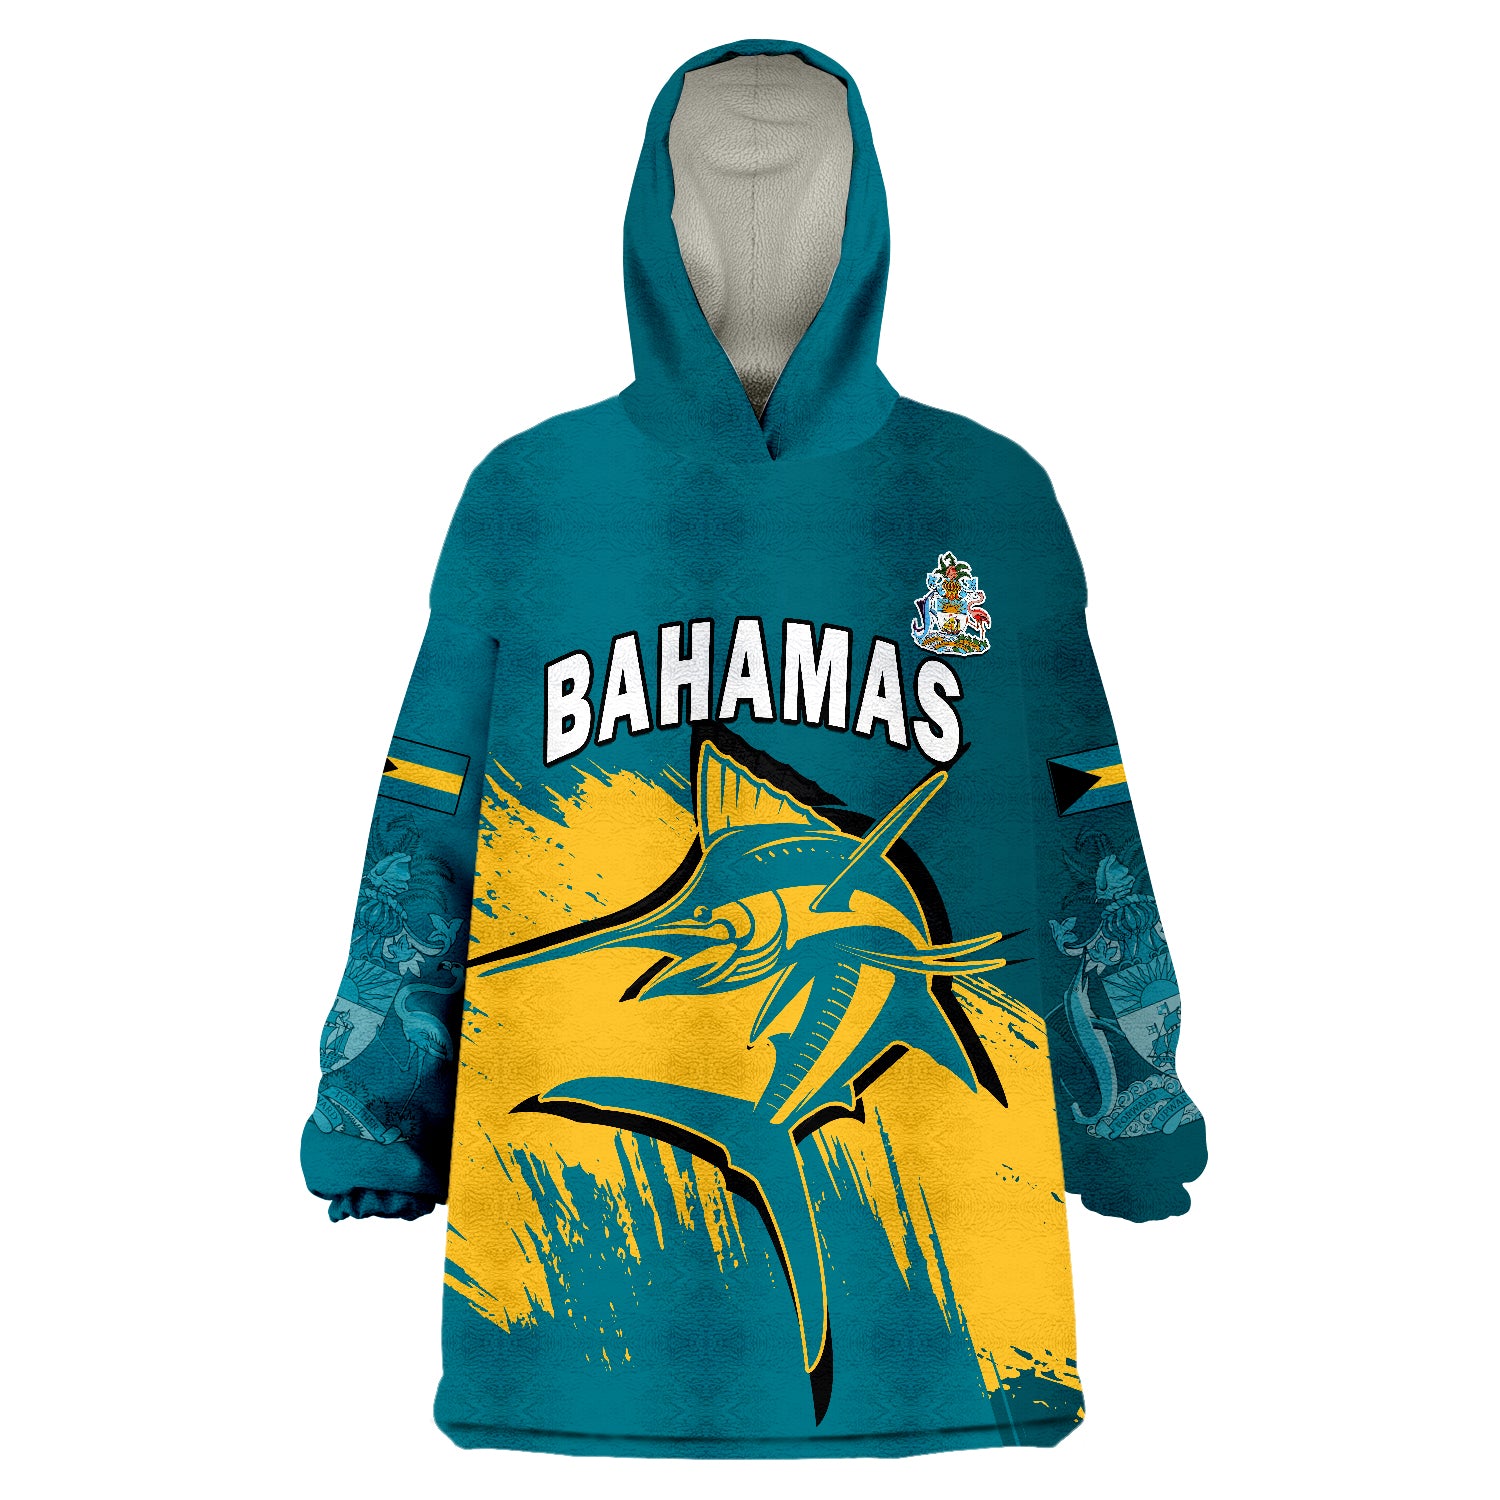 bahamas-blue-marlin-with-bahamian-coat-of-arms-wearable-blanket-hoodie